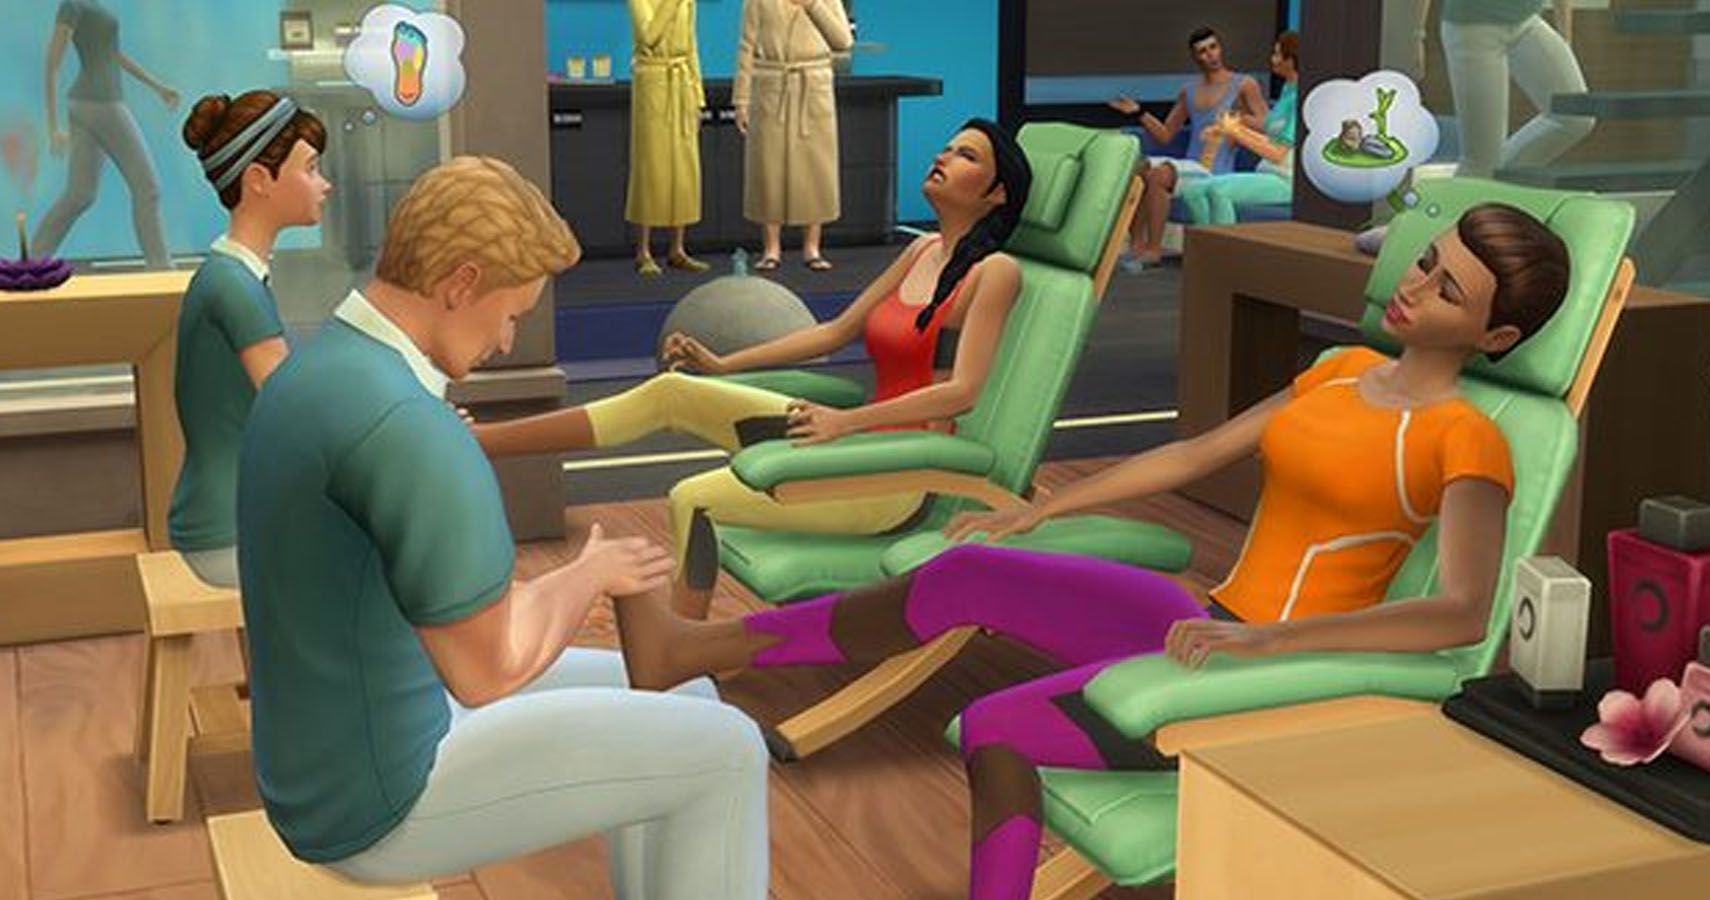 Two sims in the wellness chairs at a spa.